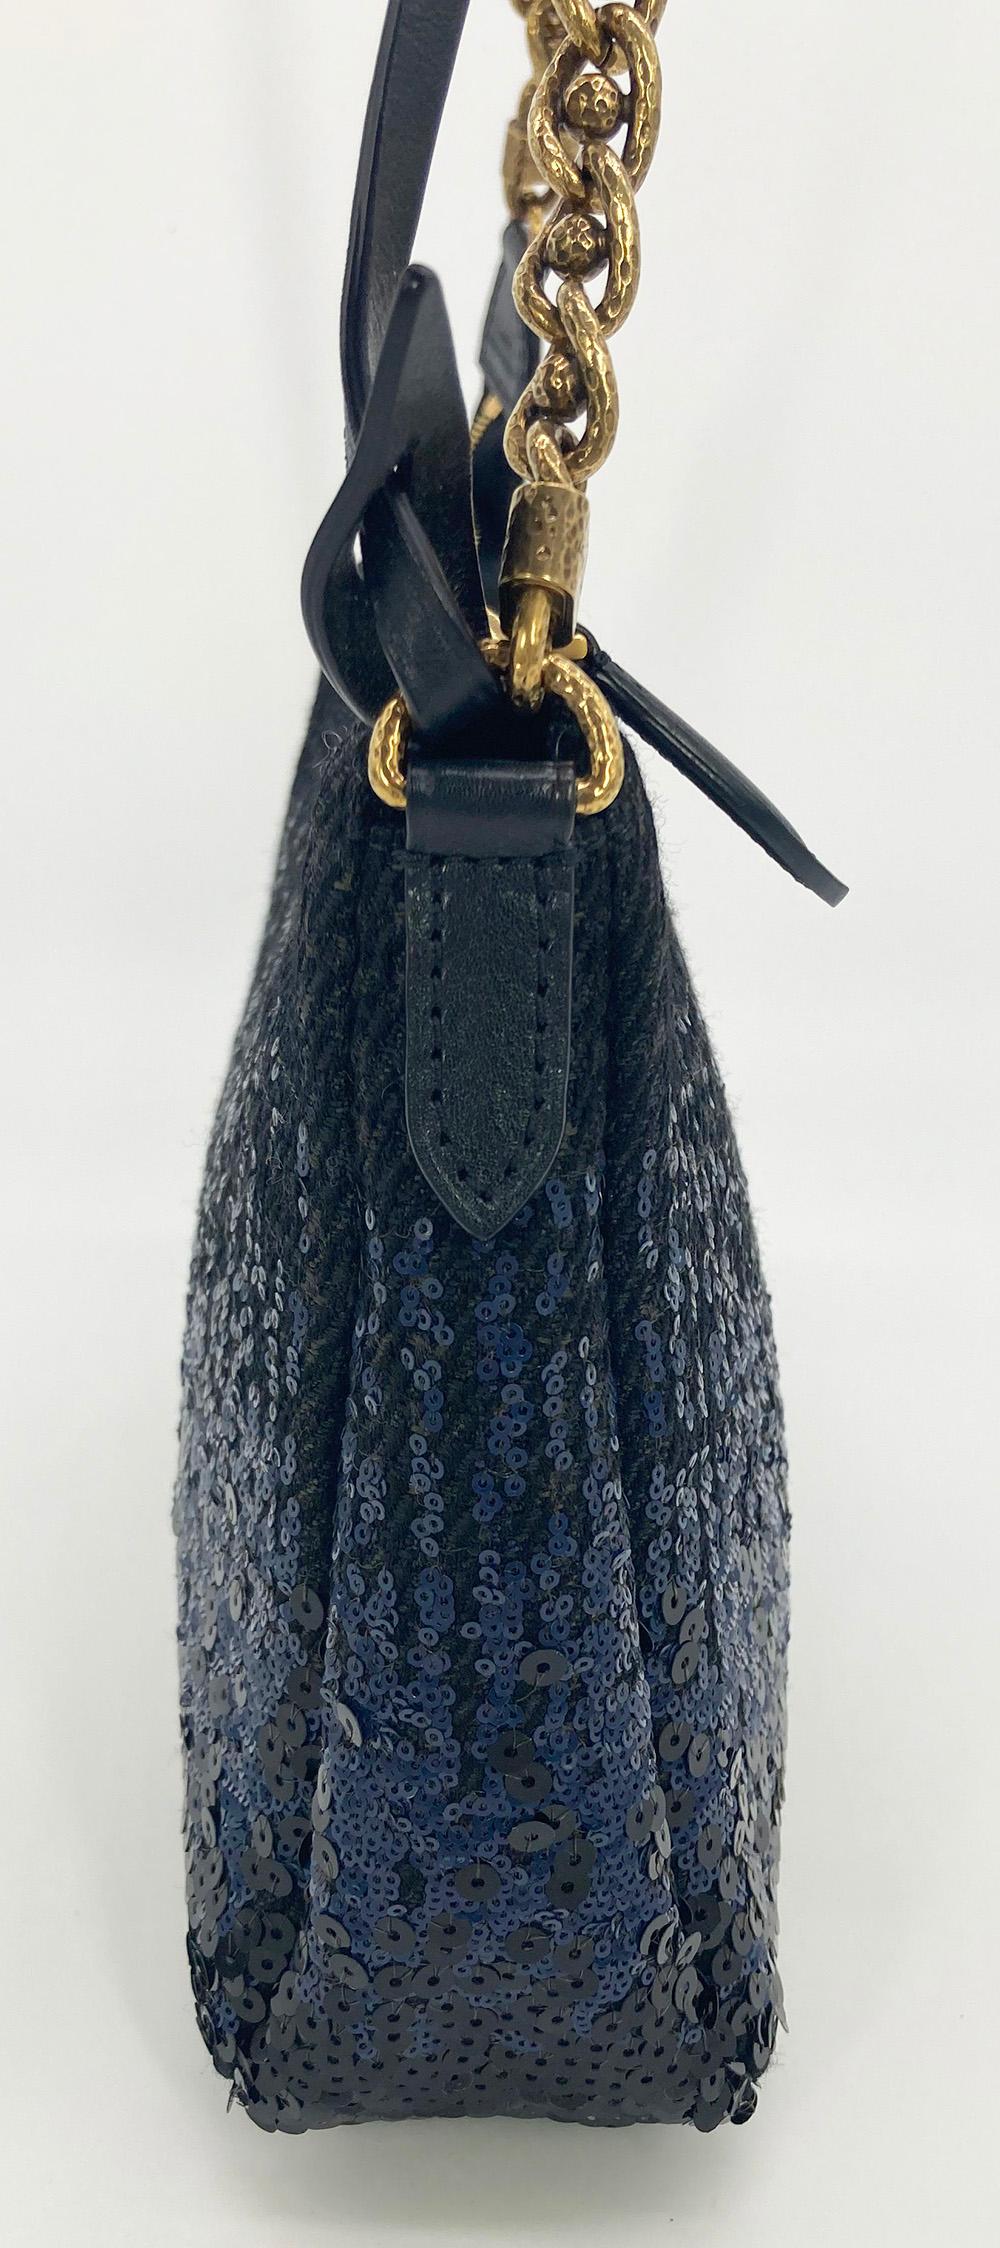 Louis Vuitton Sequin Reverie Pochette in excellent condition. Navy and gray plaid woven wool trimmed with black and navy sequins in an ombre pattern from the bottom up. navy leather strap can be removed completely, worn as a shoulder strap, or as a